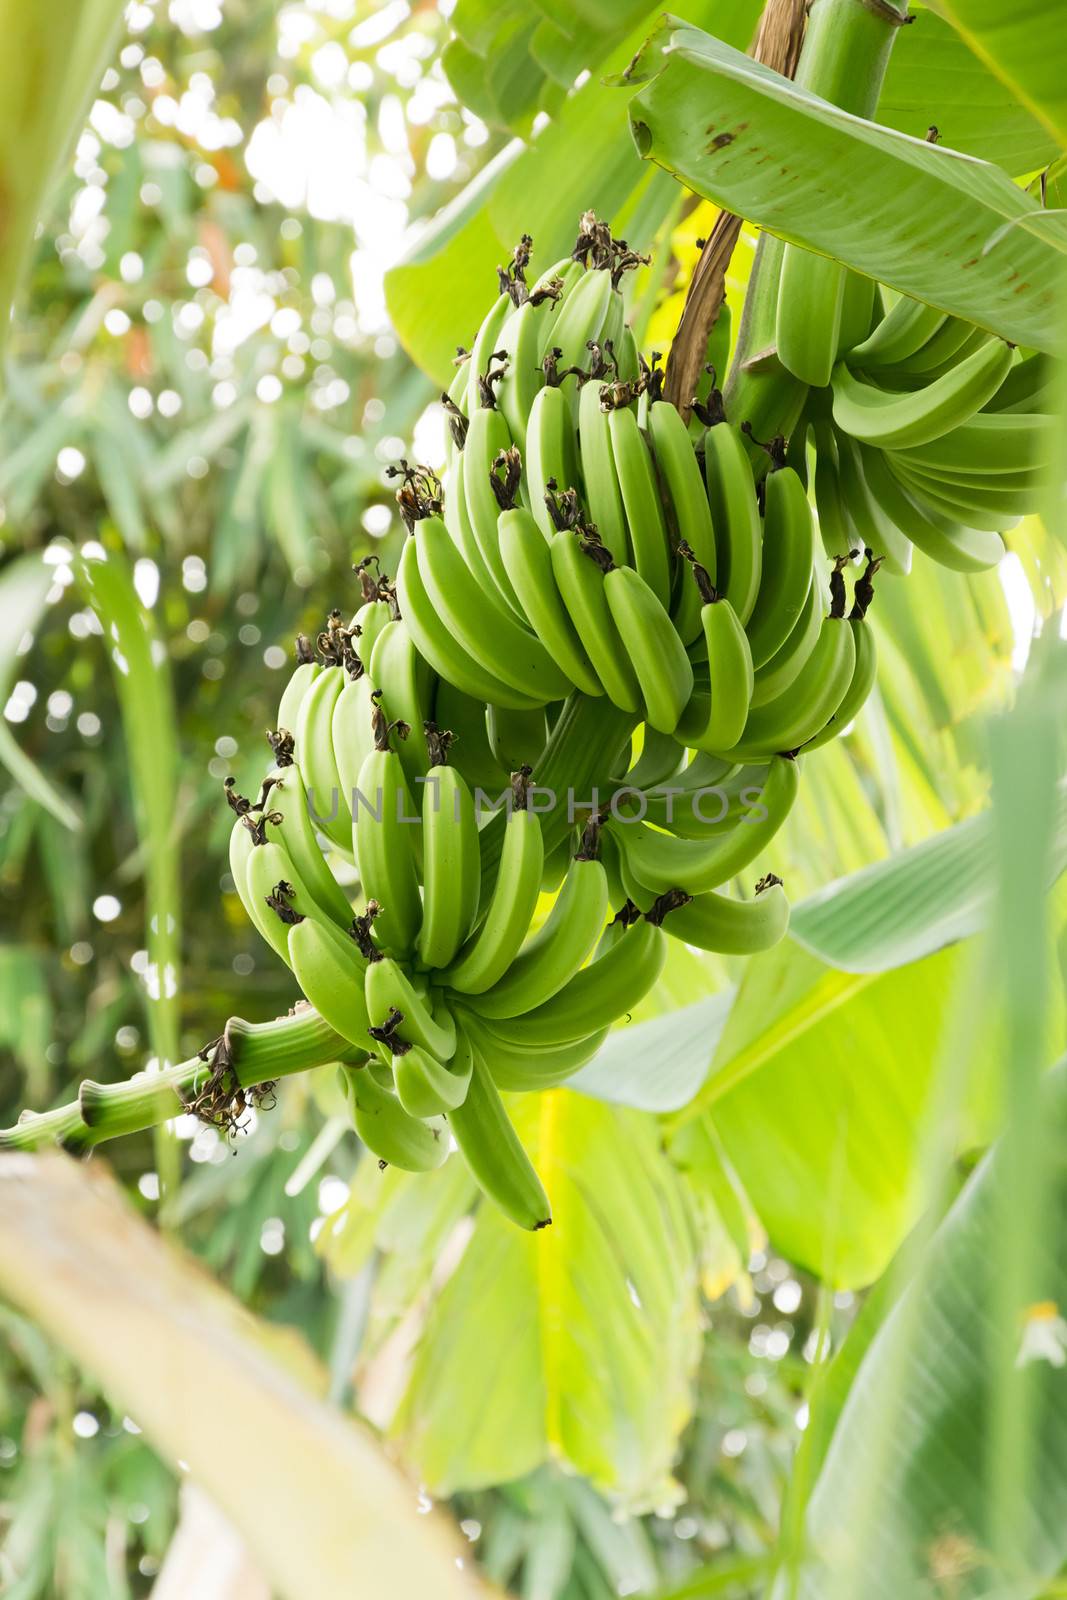 Bunch of ripening bananas on the tree